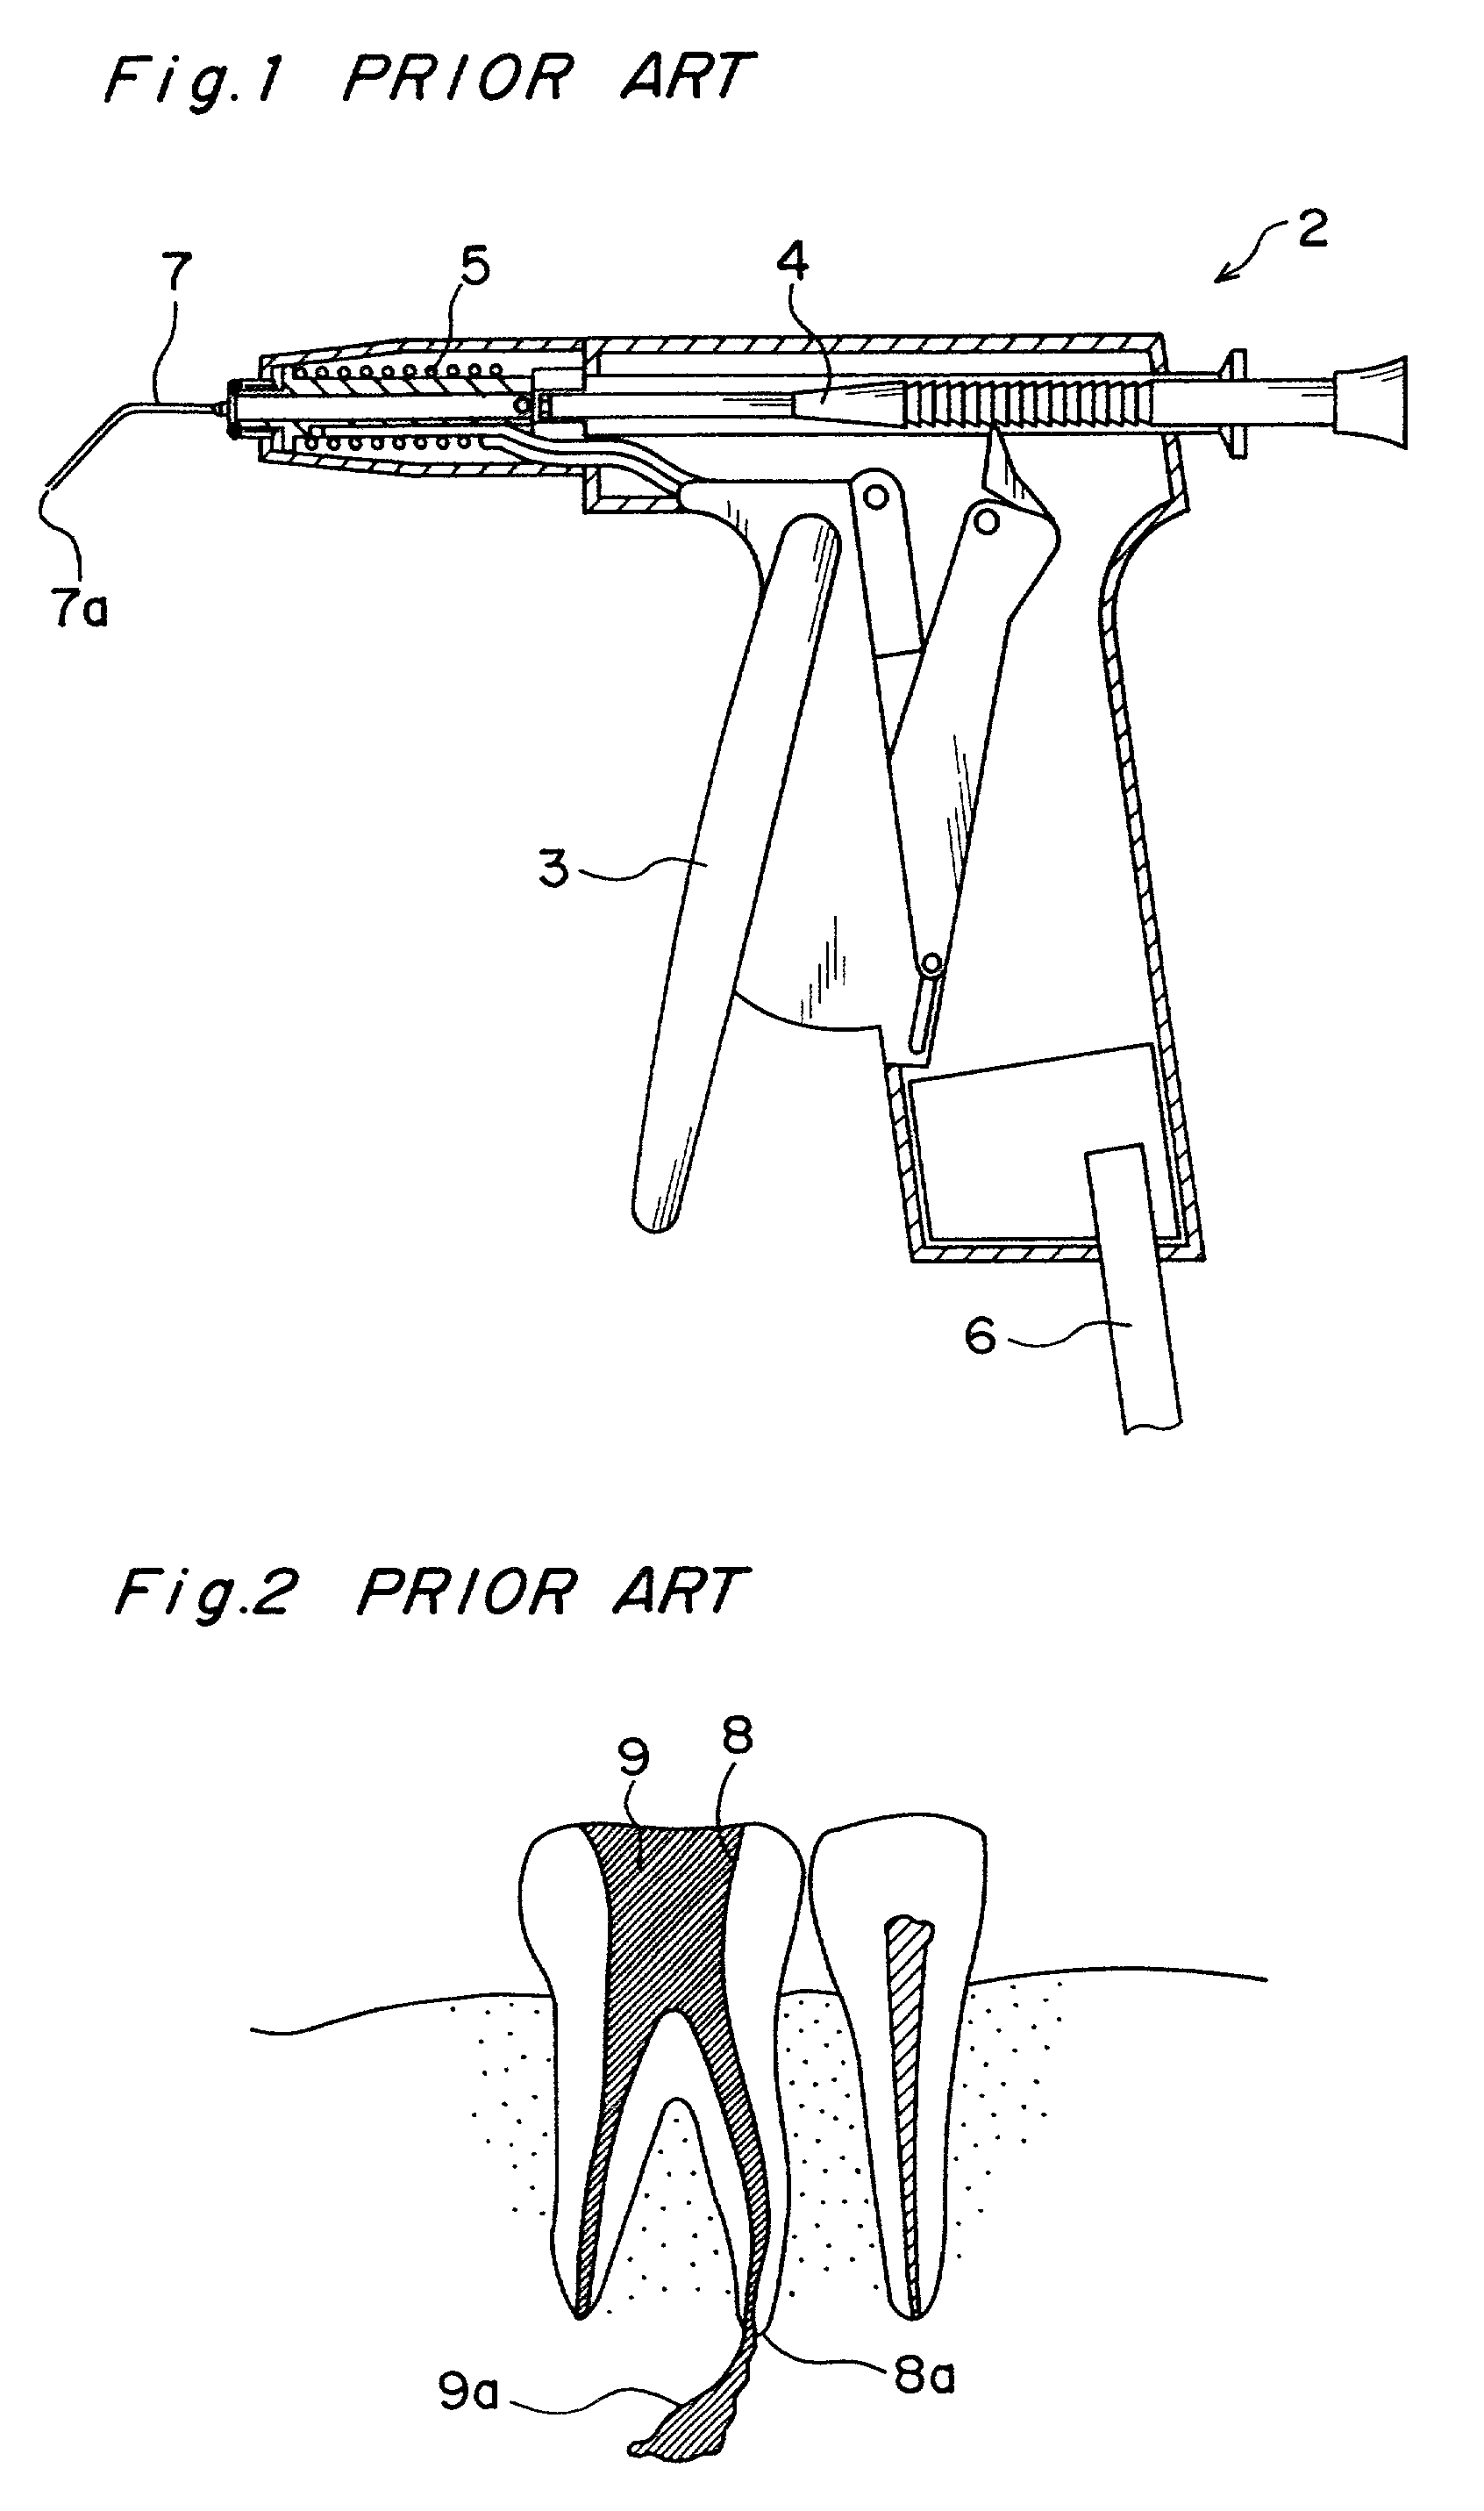 Dental filling instrument and attachment therefor